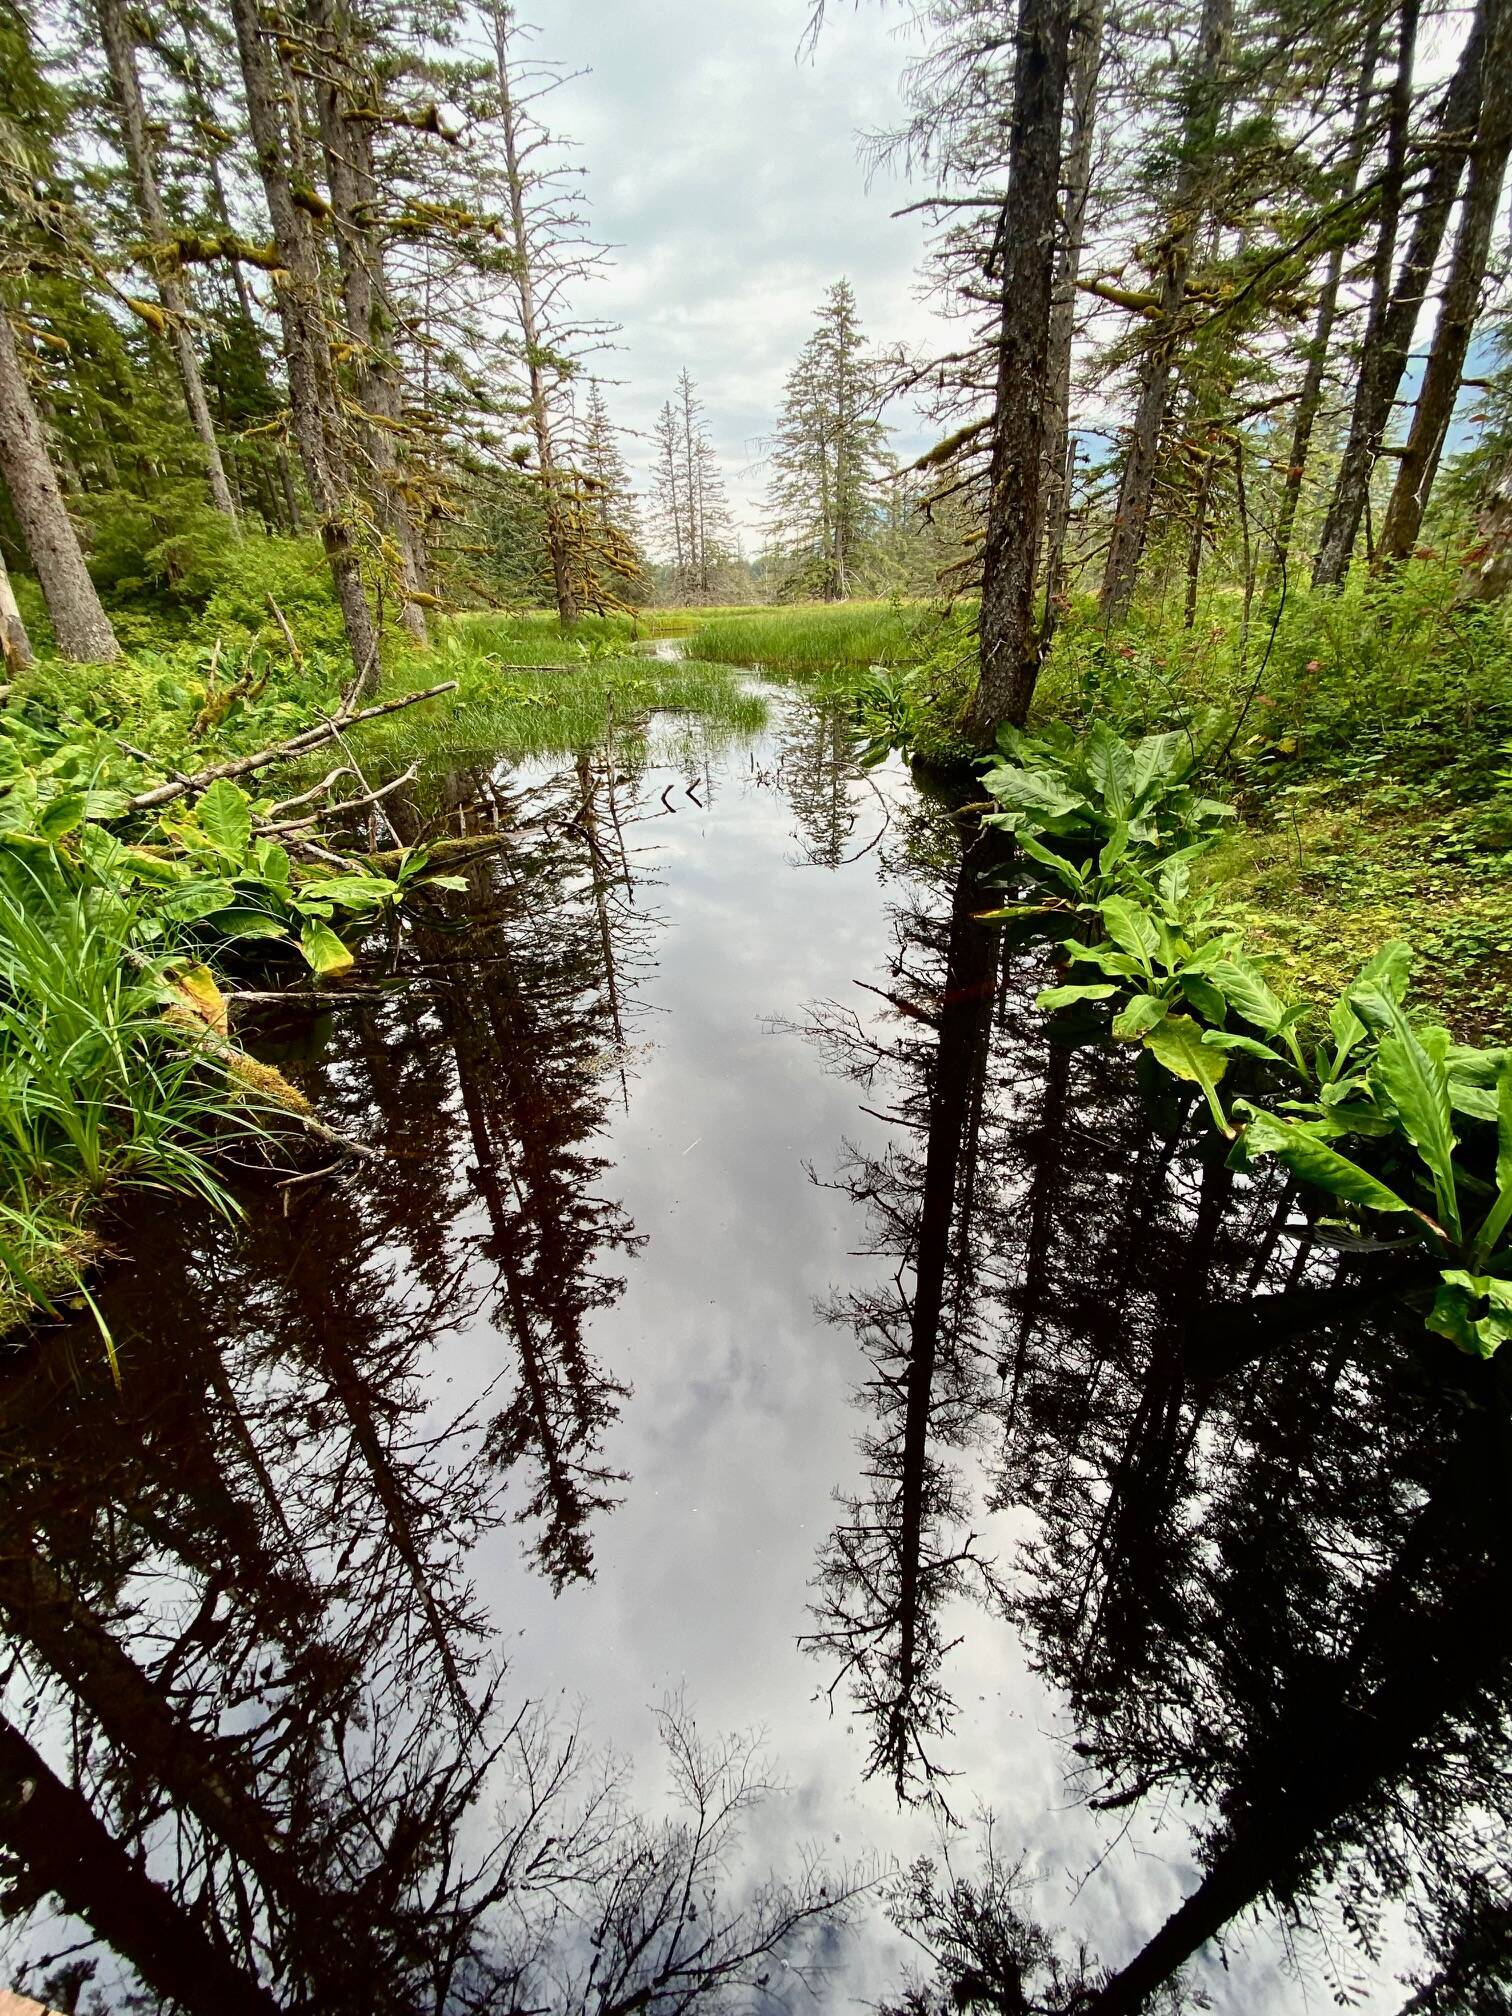 Evergreen and cloud reflections along the Point Bridget Trail on Aug. 5. (Photo by Denise Carroll)